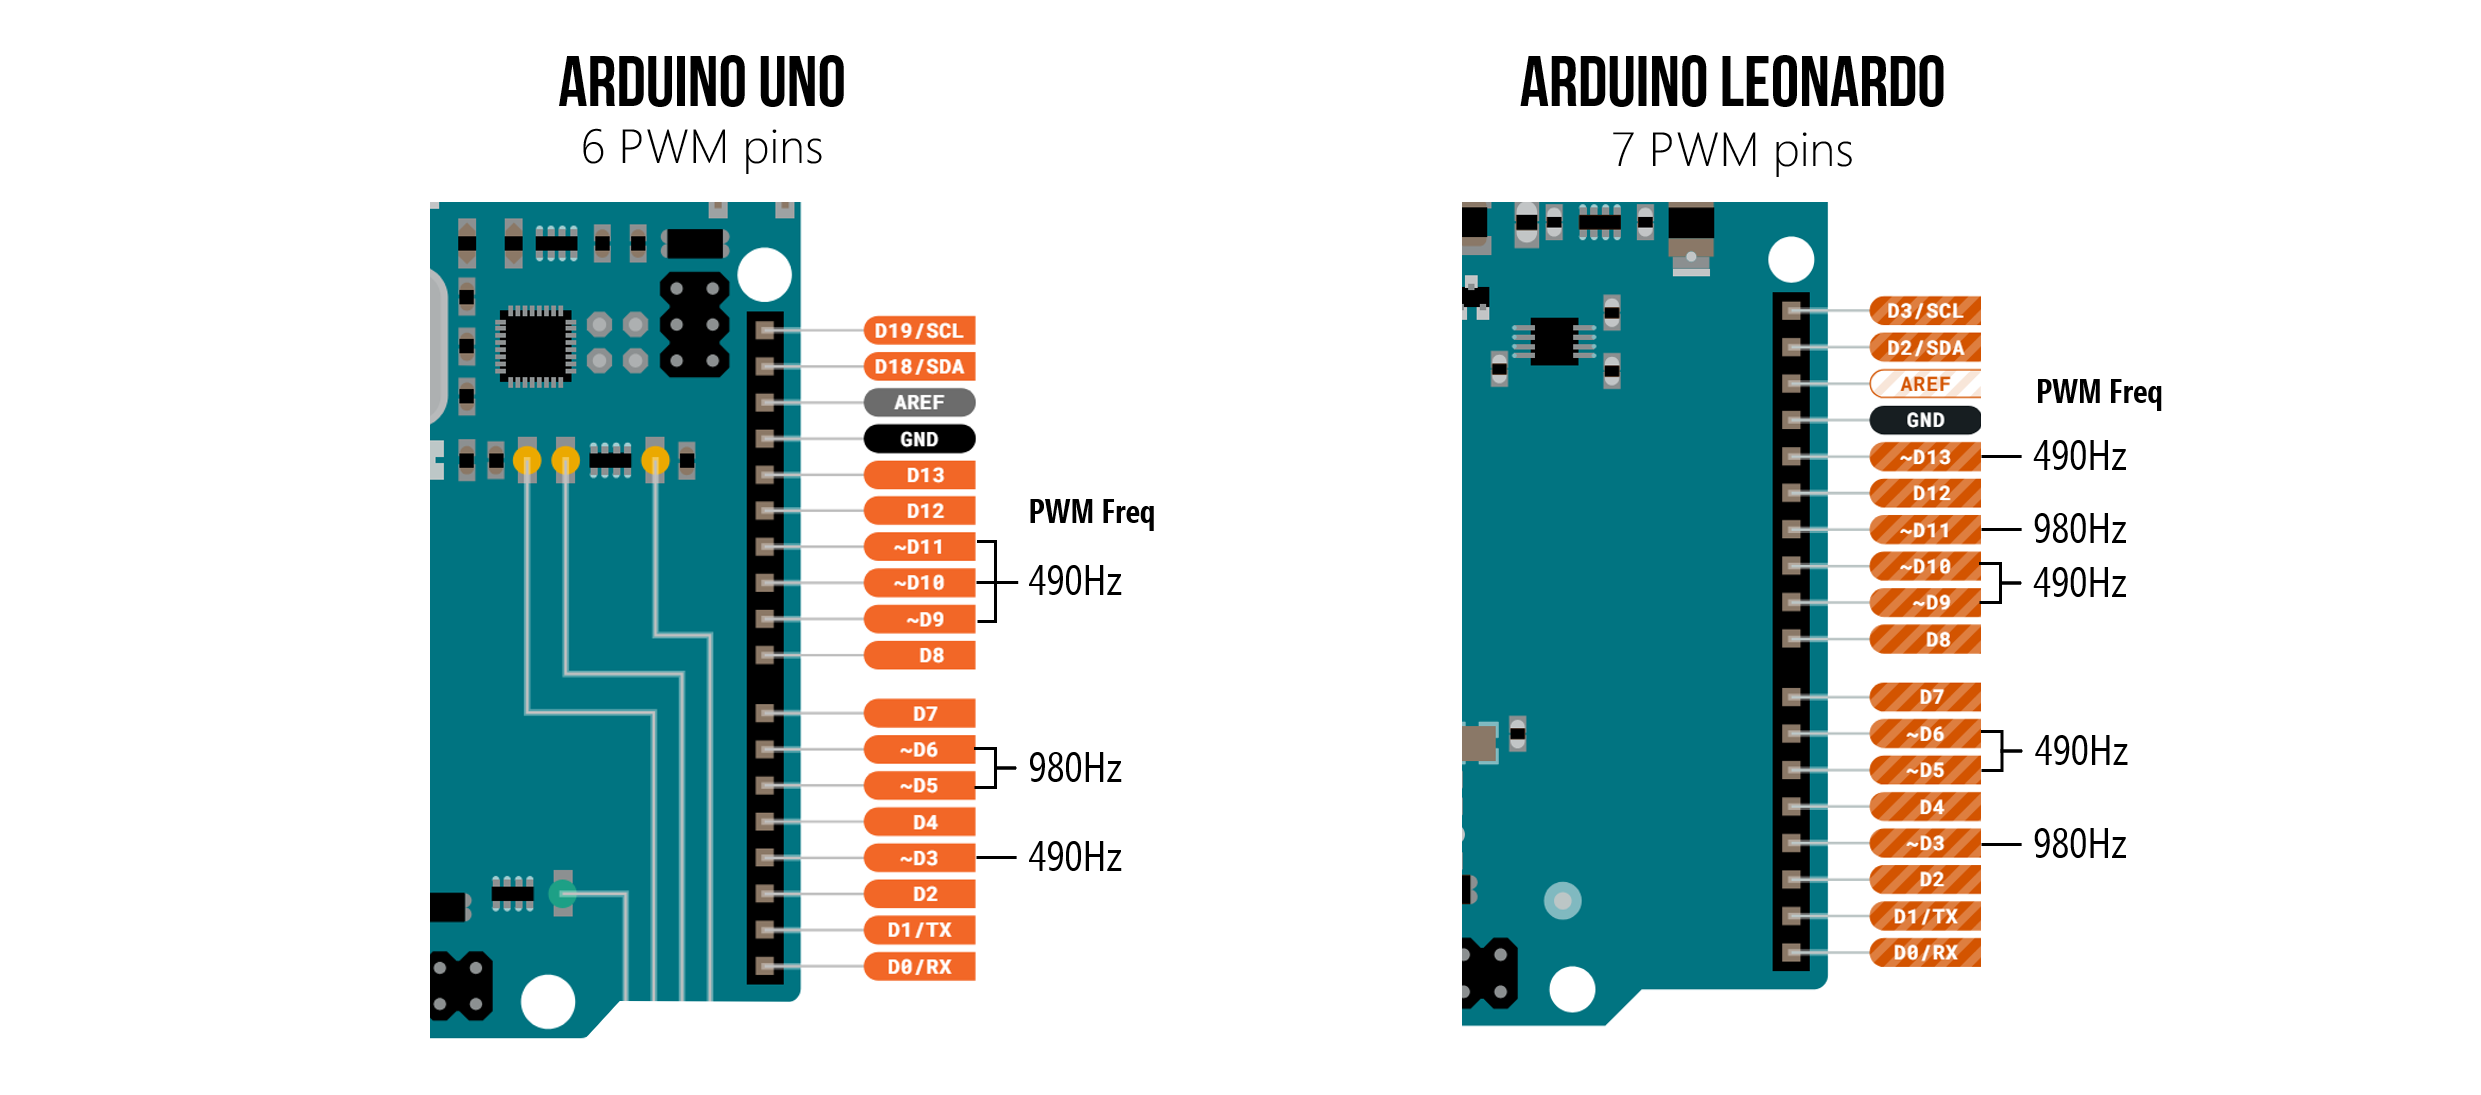 Pin out diagram showing the six PWM pins on the Uno and seven on the Leonardo along with their frequencies